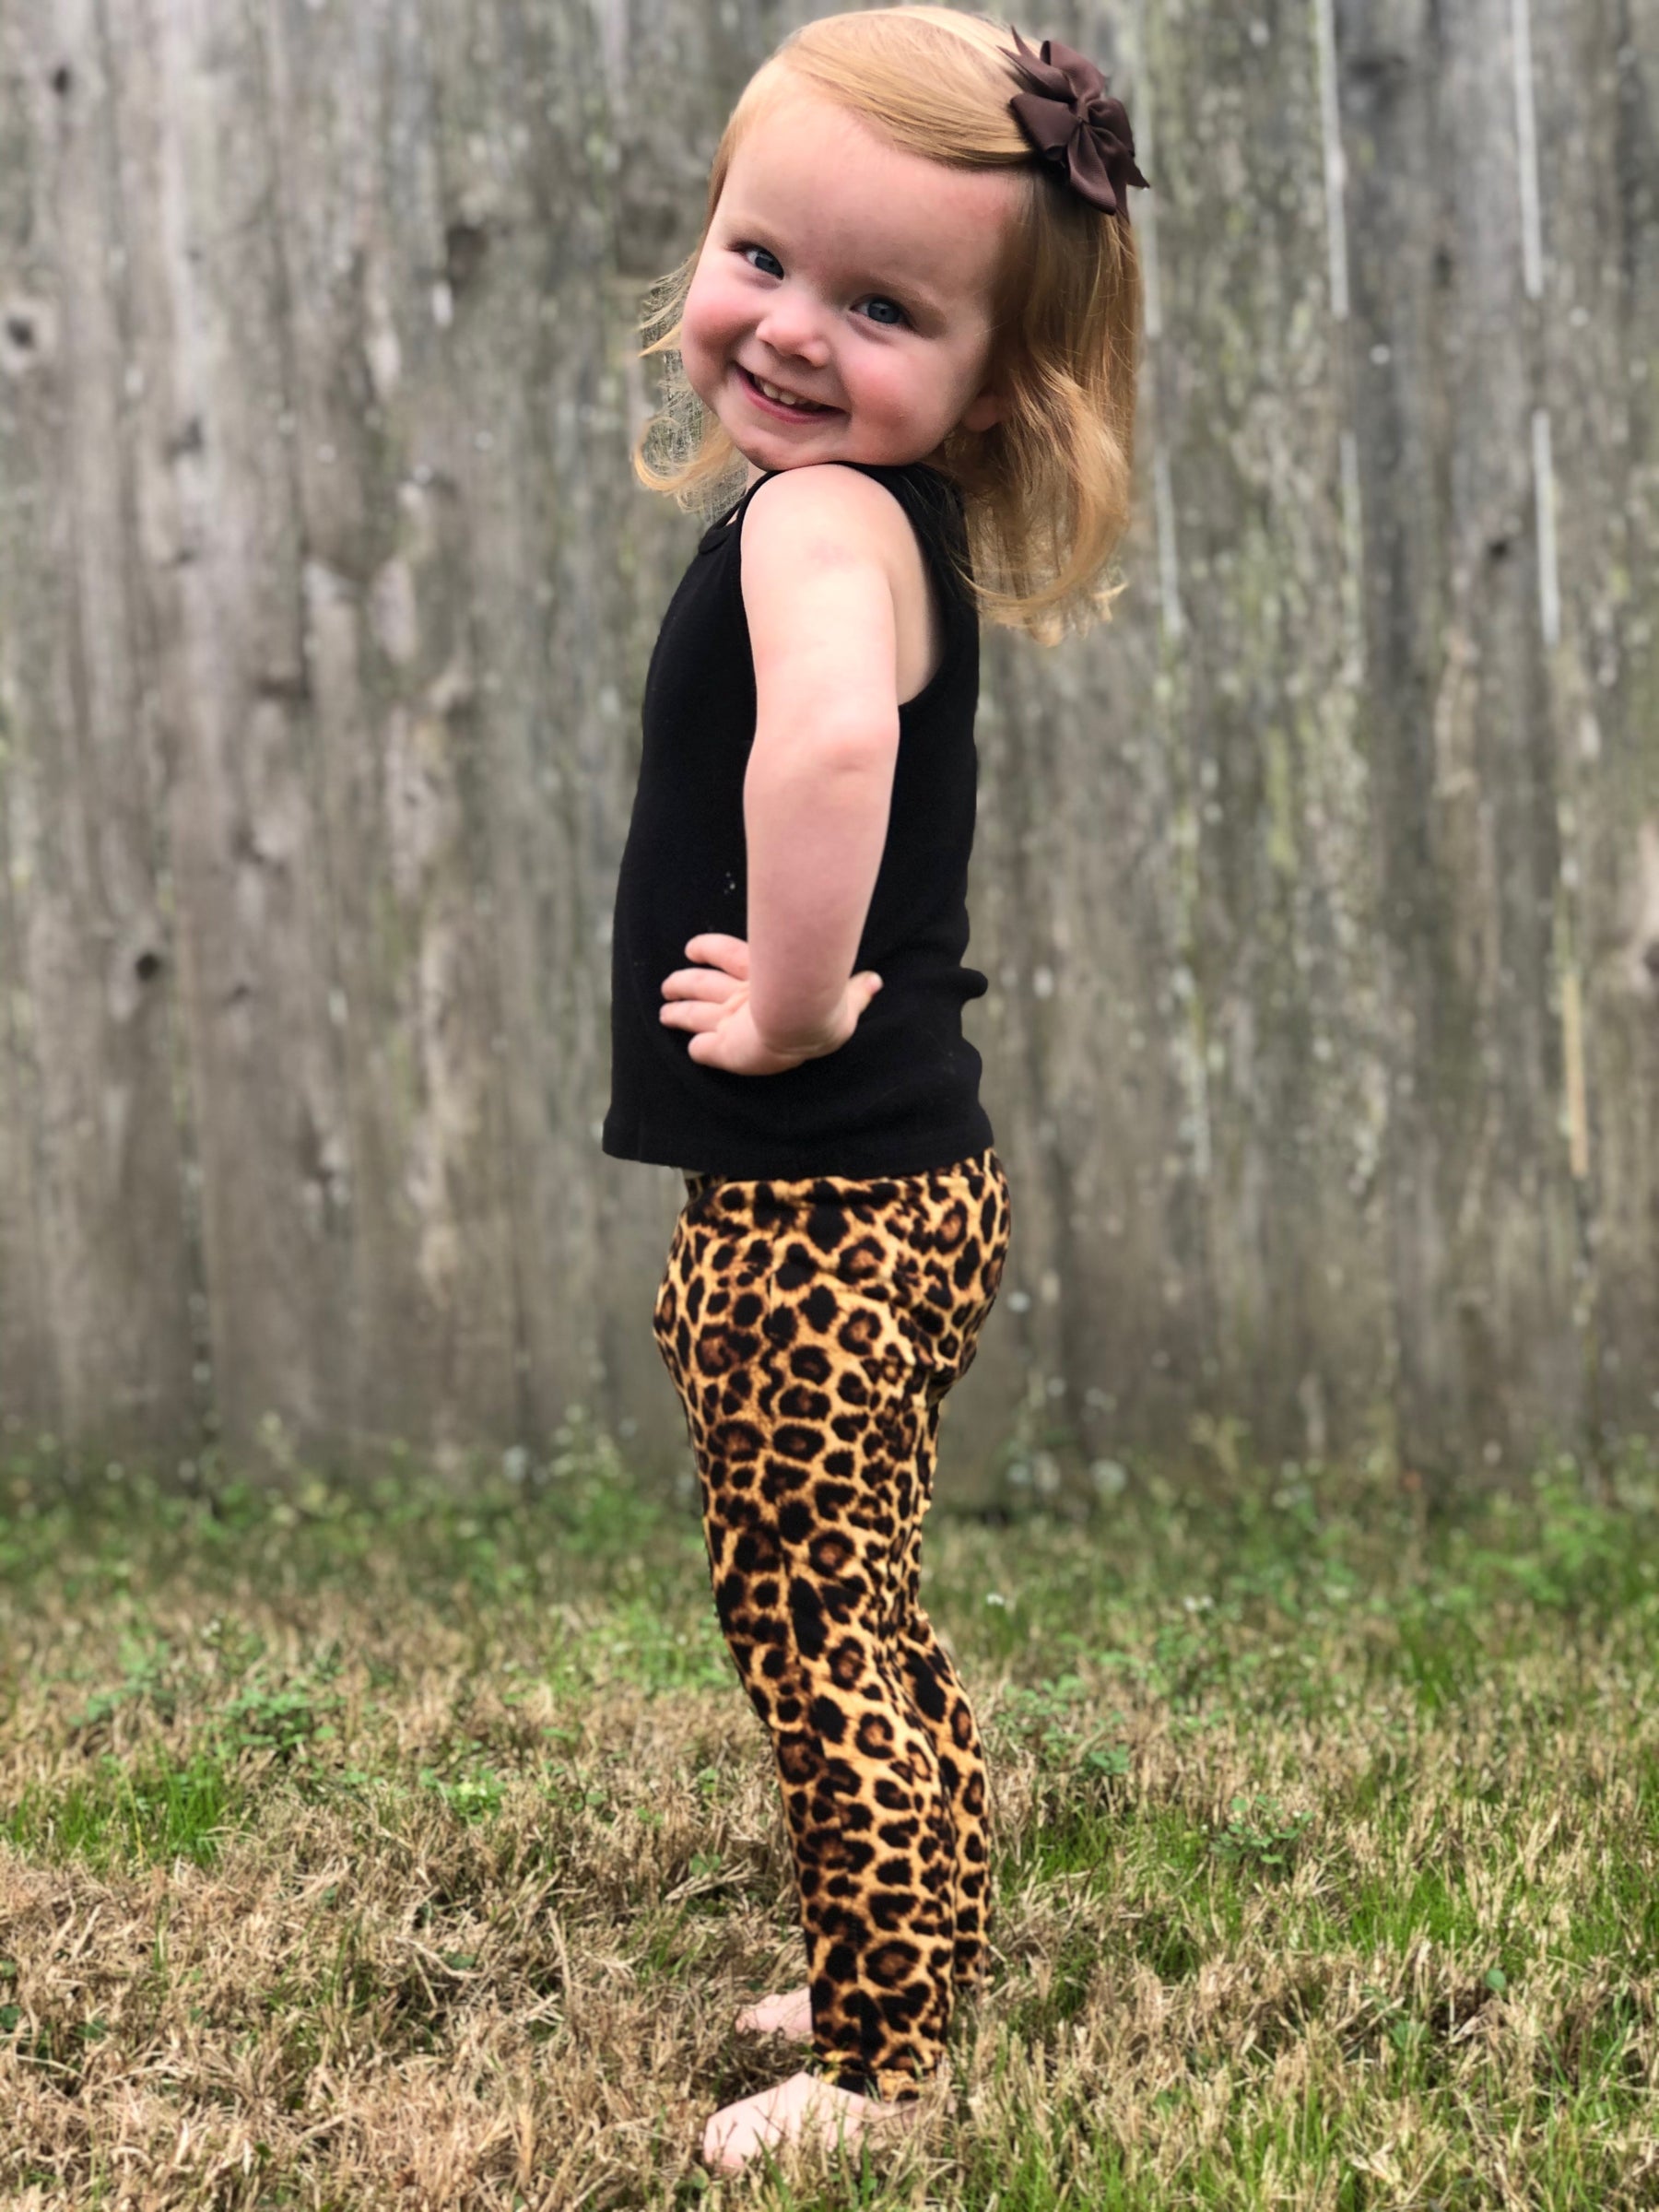 New Look sewing pattern 6761 Children's Top and Leggings —  -  Sewing Supplies